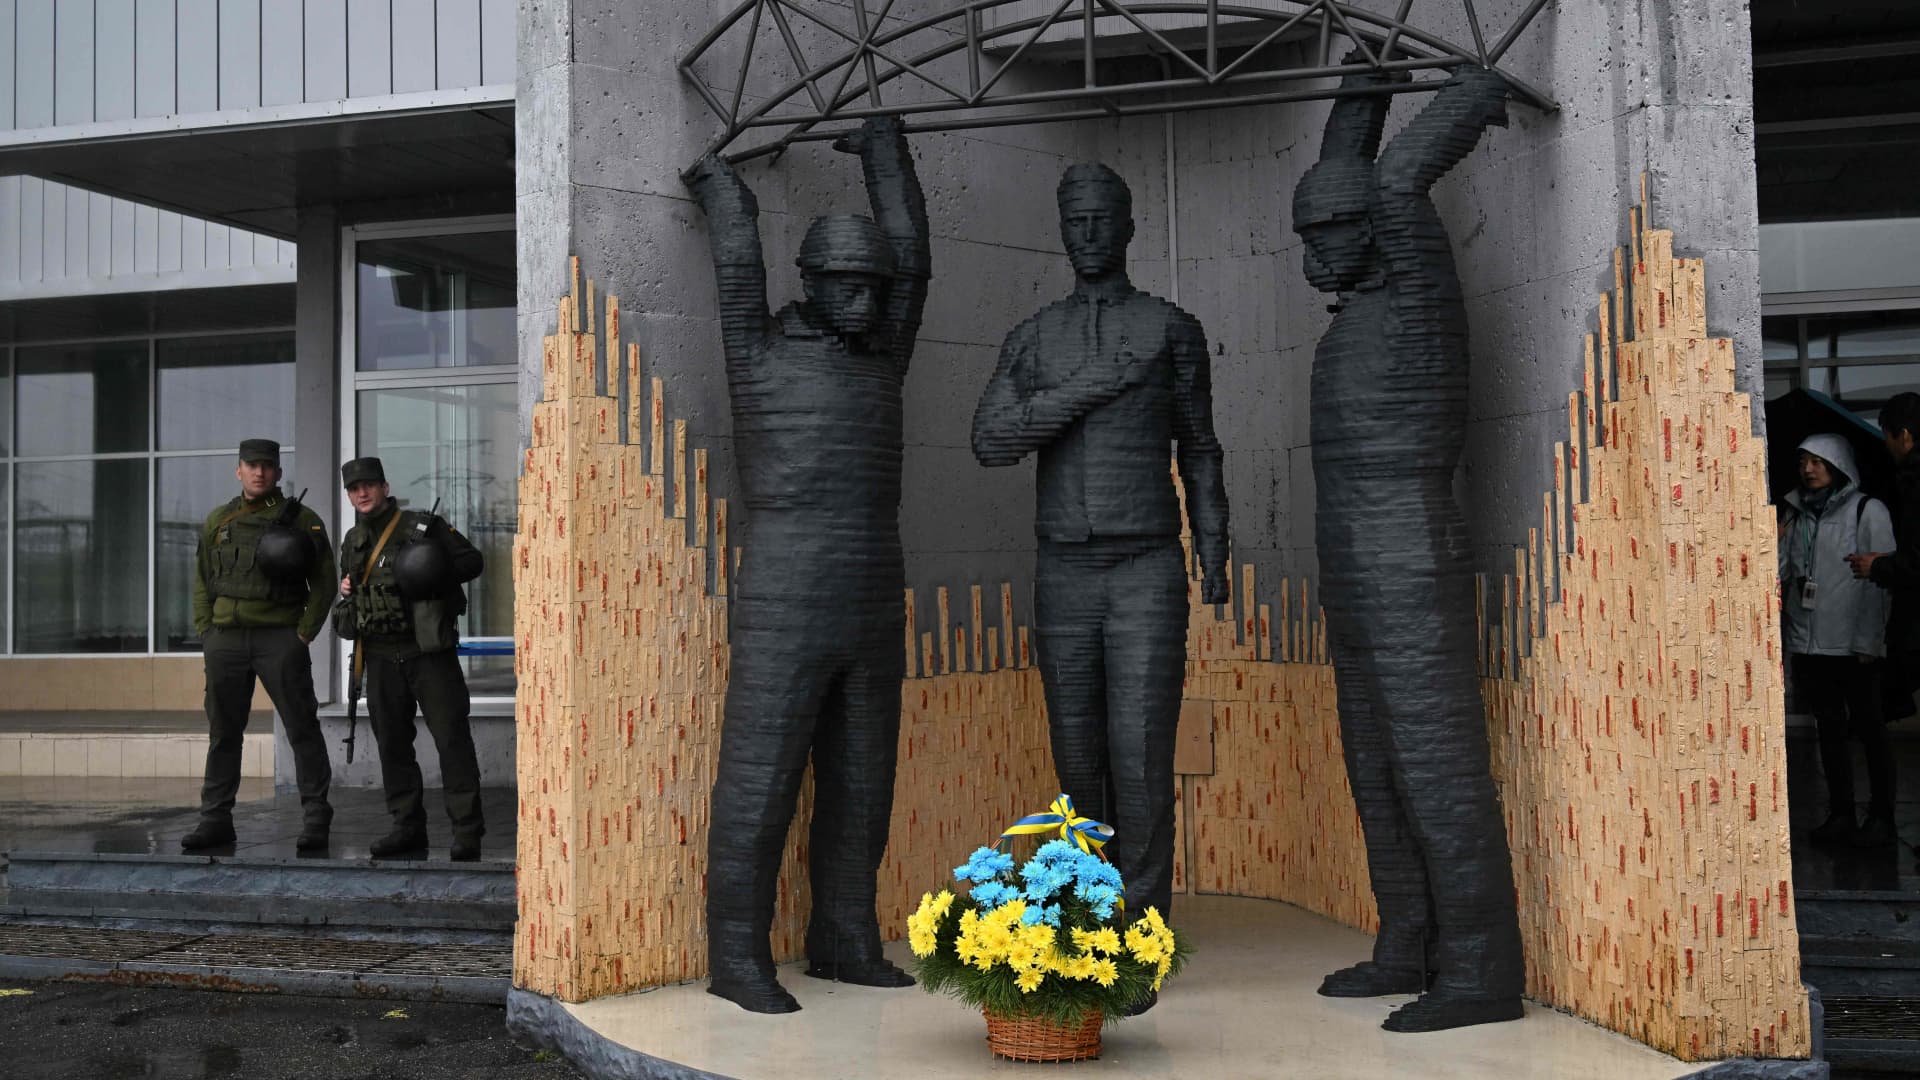 Ukrainian National Guard of Ukraine servicemen stand guard at entrance to Chernobyl Nuclear Power Plant Chernobyl Nuclear Power Plant on April 26, 2022 on the 36th anniversary of the world's worst nuclear disaster. 